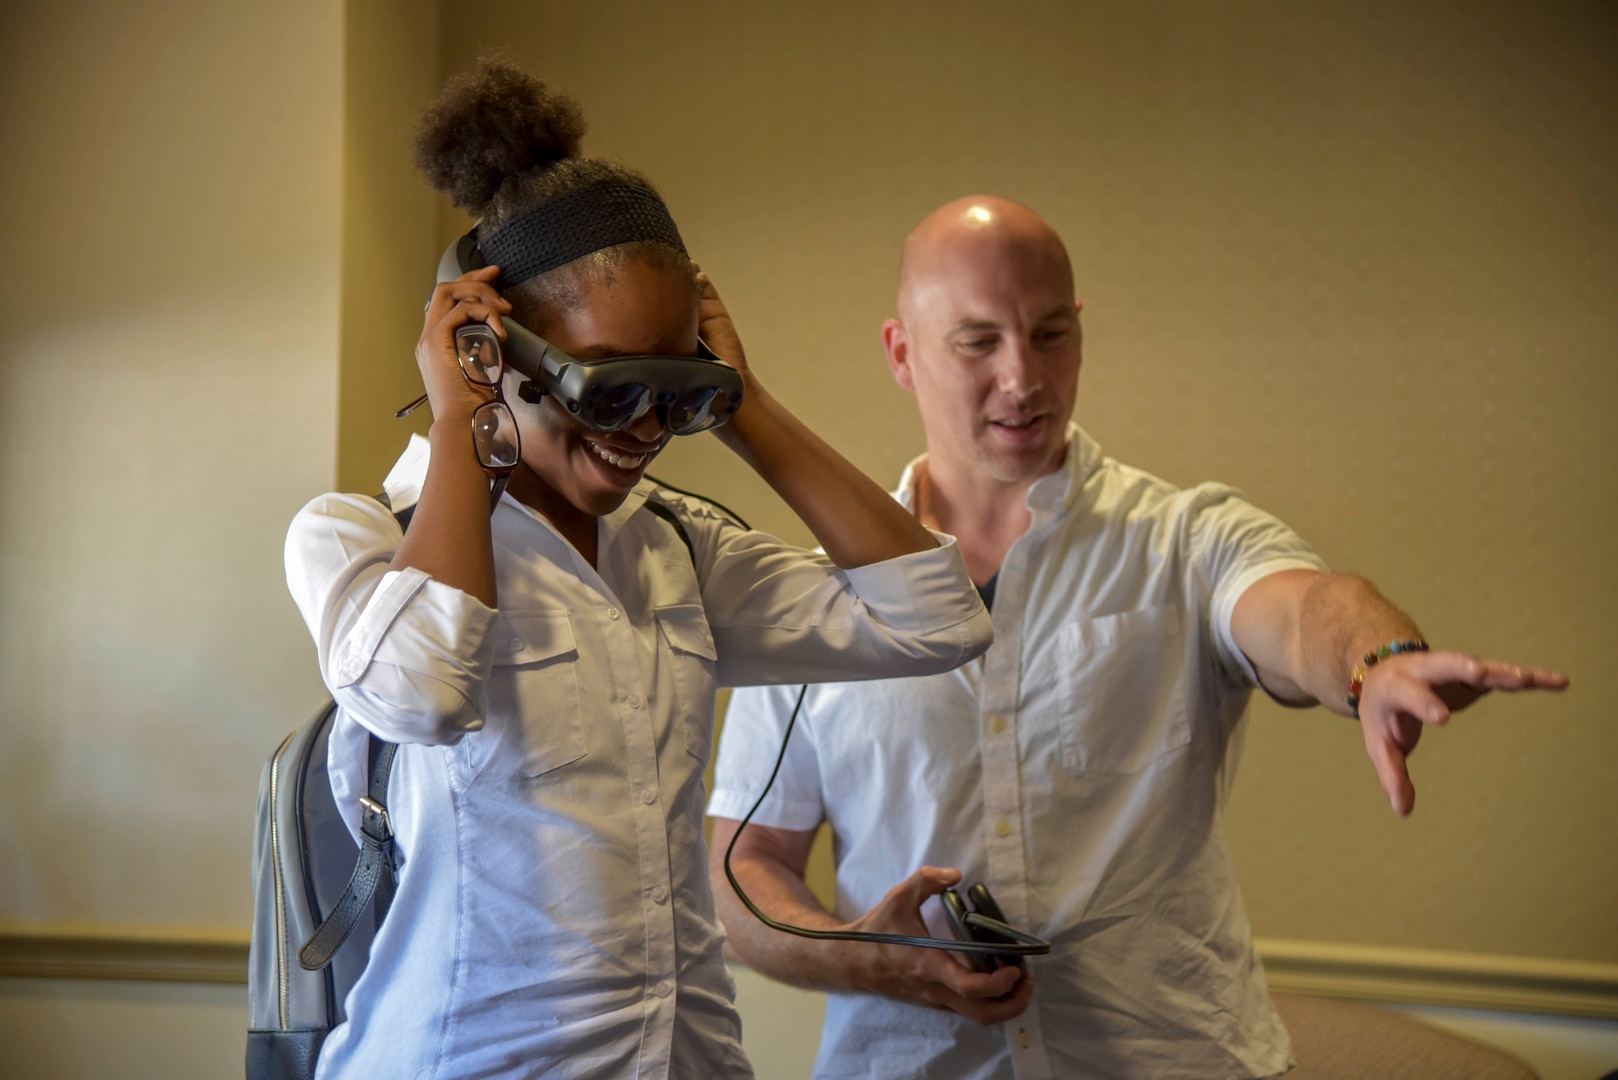 PHILADELPHIA (August 15, 2019) Naval Surface Warfare Center, Philadelphia Division (NSWCPD) engineer Patrick Violante demonstrates augmented reality to a Girl Scout summer camper during the Girl Scouts of Eastern Pennsylvania for their STEM Experience Summer Camp on Aug. 15. Violante works with the Command’s Advanced Data Acquisition, Prototyping Technologies and Virtual Environments lab, which focuses on cutting-edge 3-D modeling, scanning, and printing. (U.S. Navy photo by Kirsten St. Peter/Released)